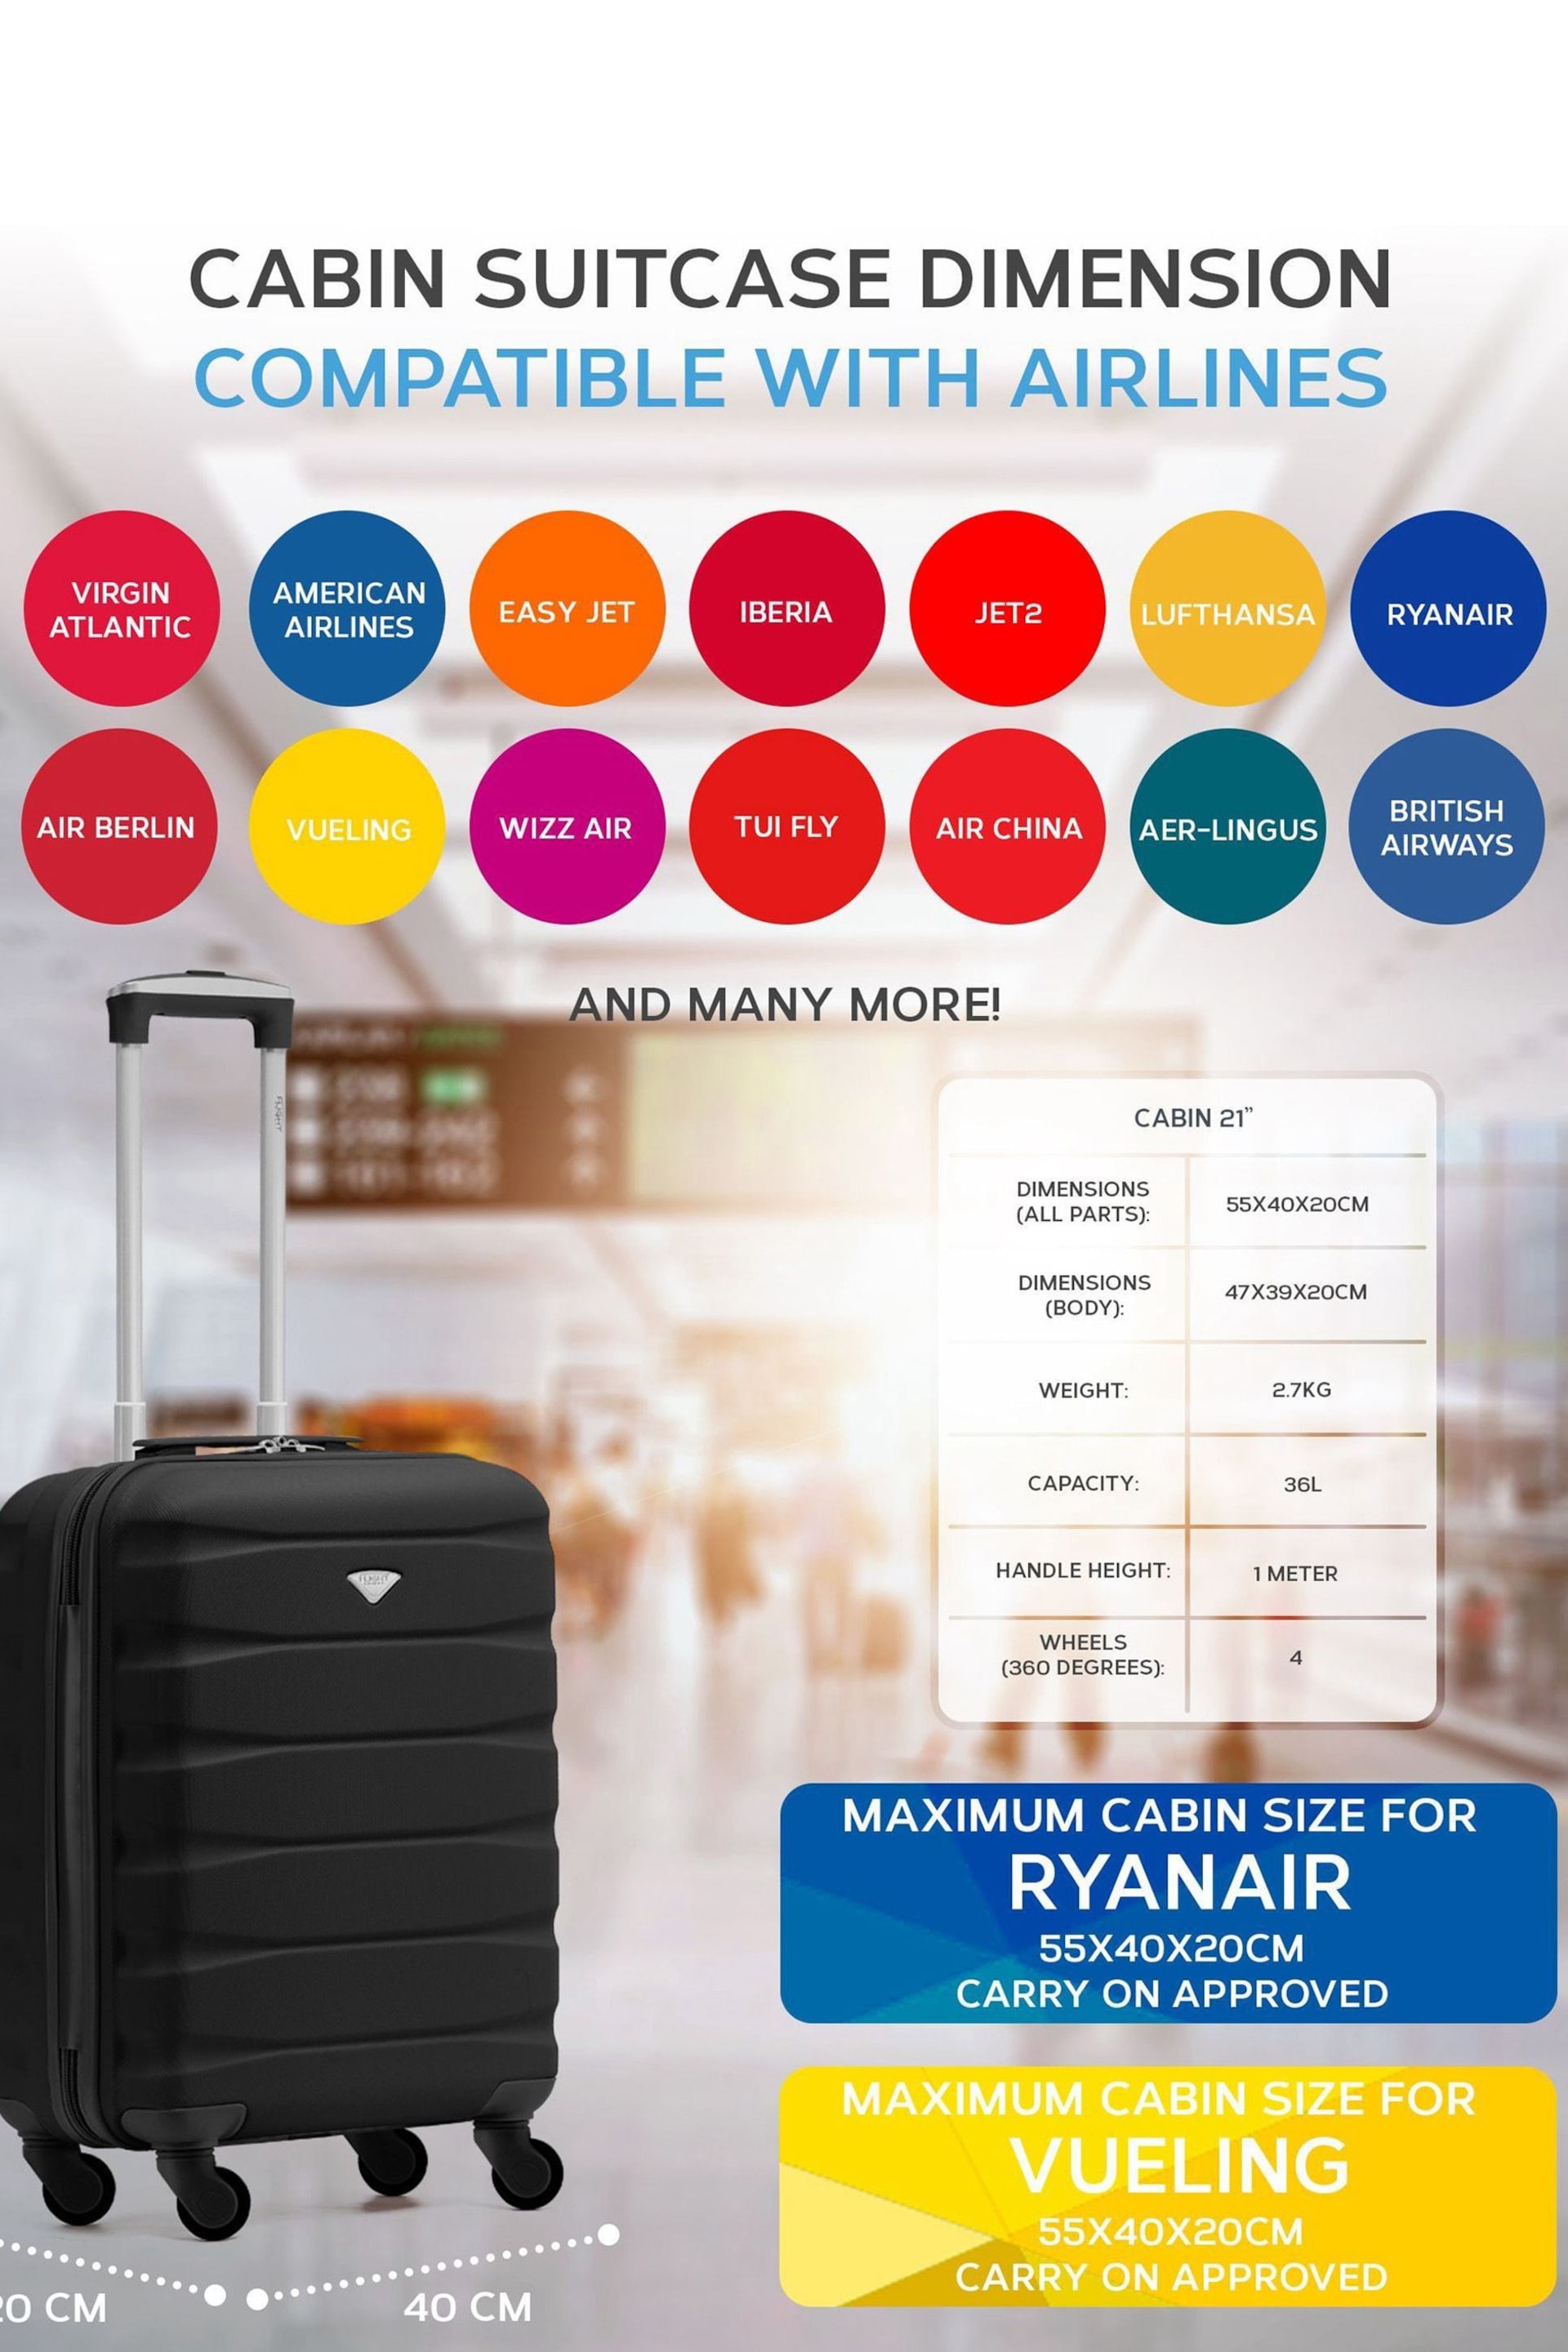 Flight Knight 55x40x20cm Ryanair Priority 4 Wheel ABS Hard Case Cabin Carry On Hand Black Luggage - Image 3 of 7